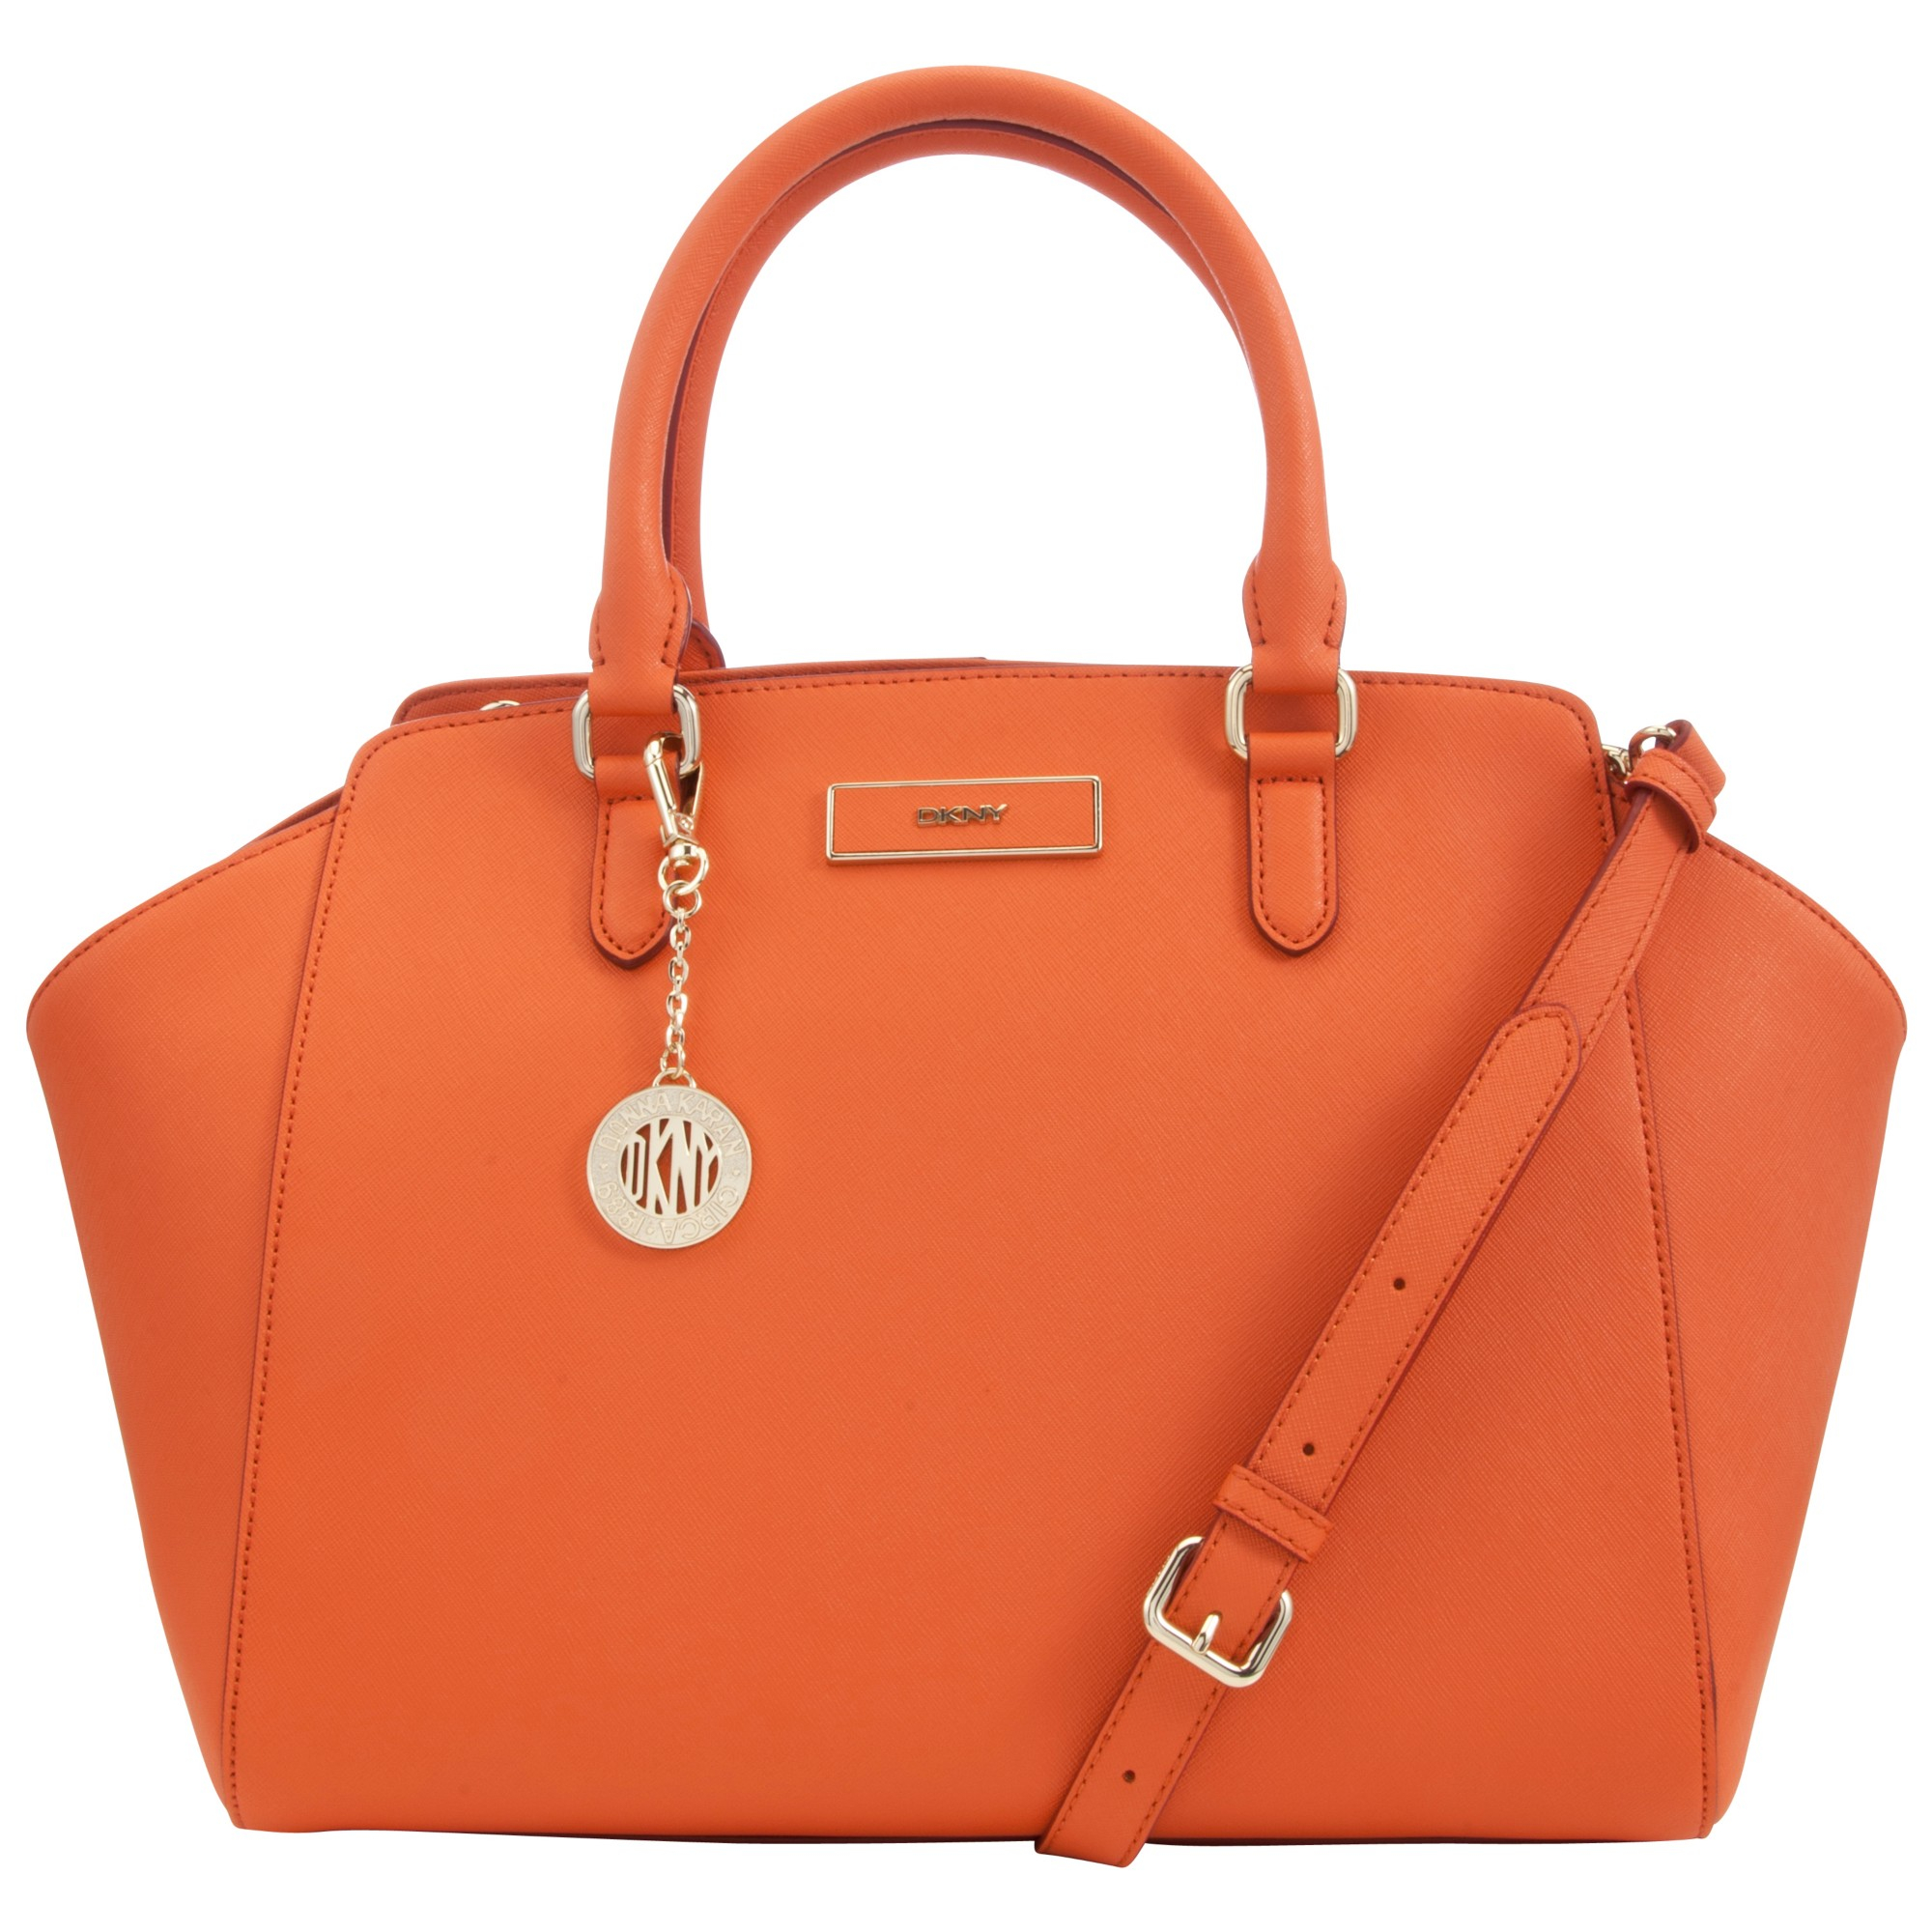 Dkny Saffiano Leather Tote Bag in Orange | Lyst